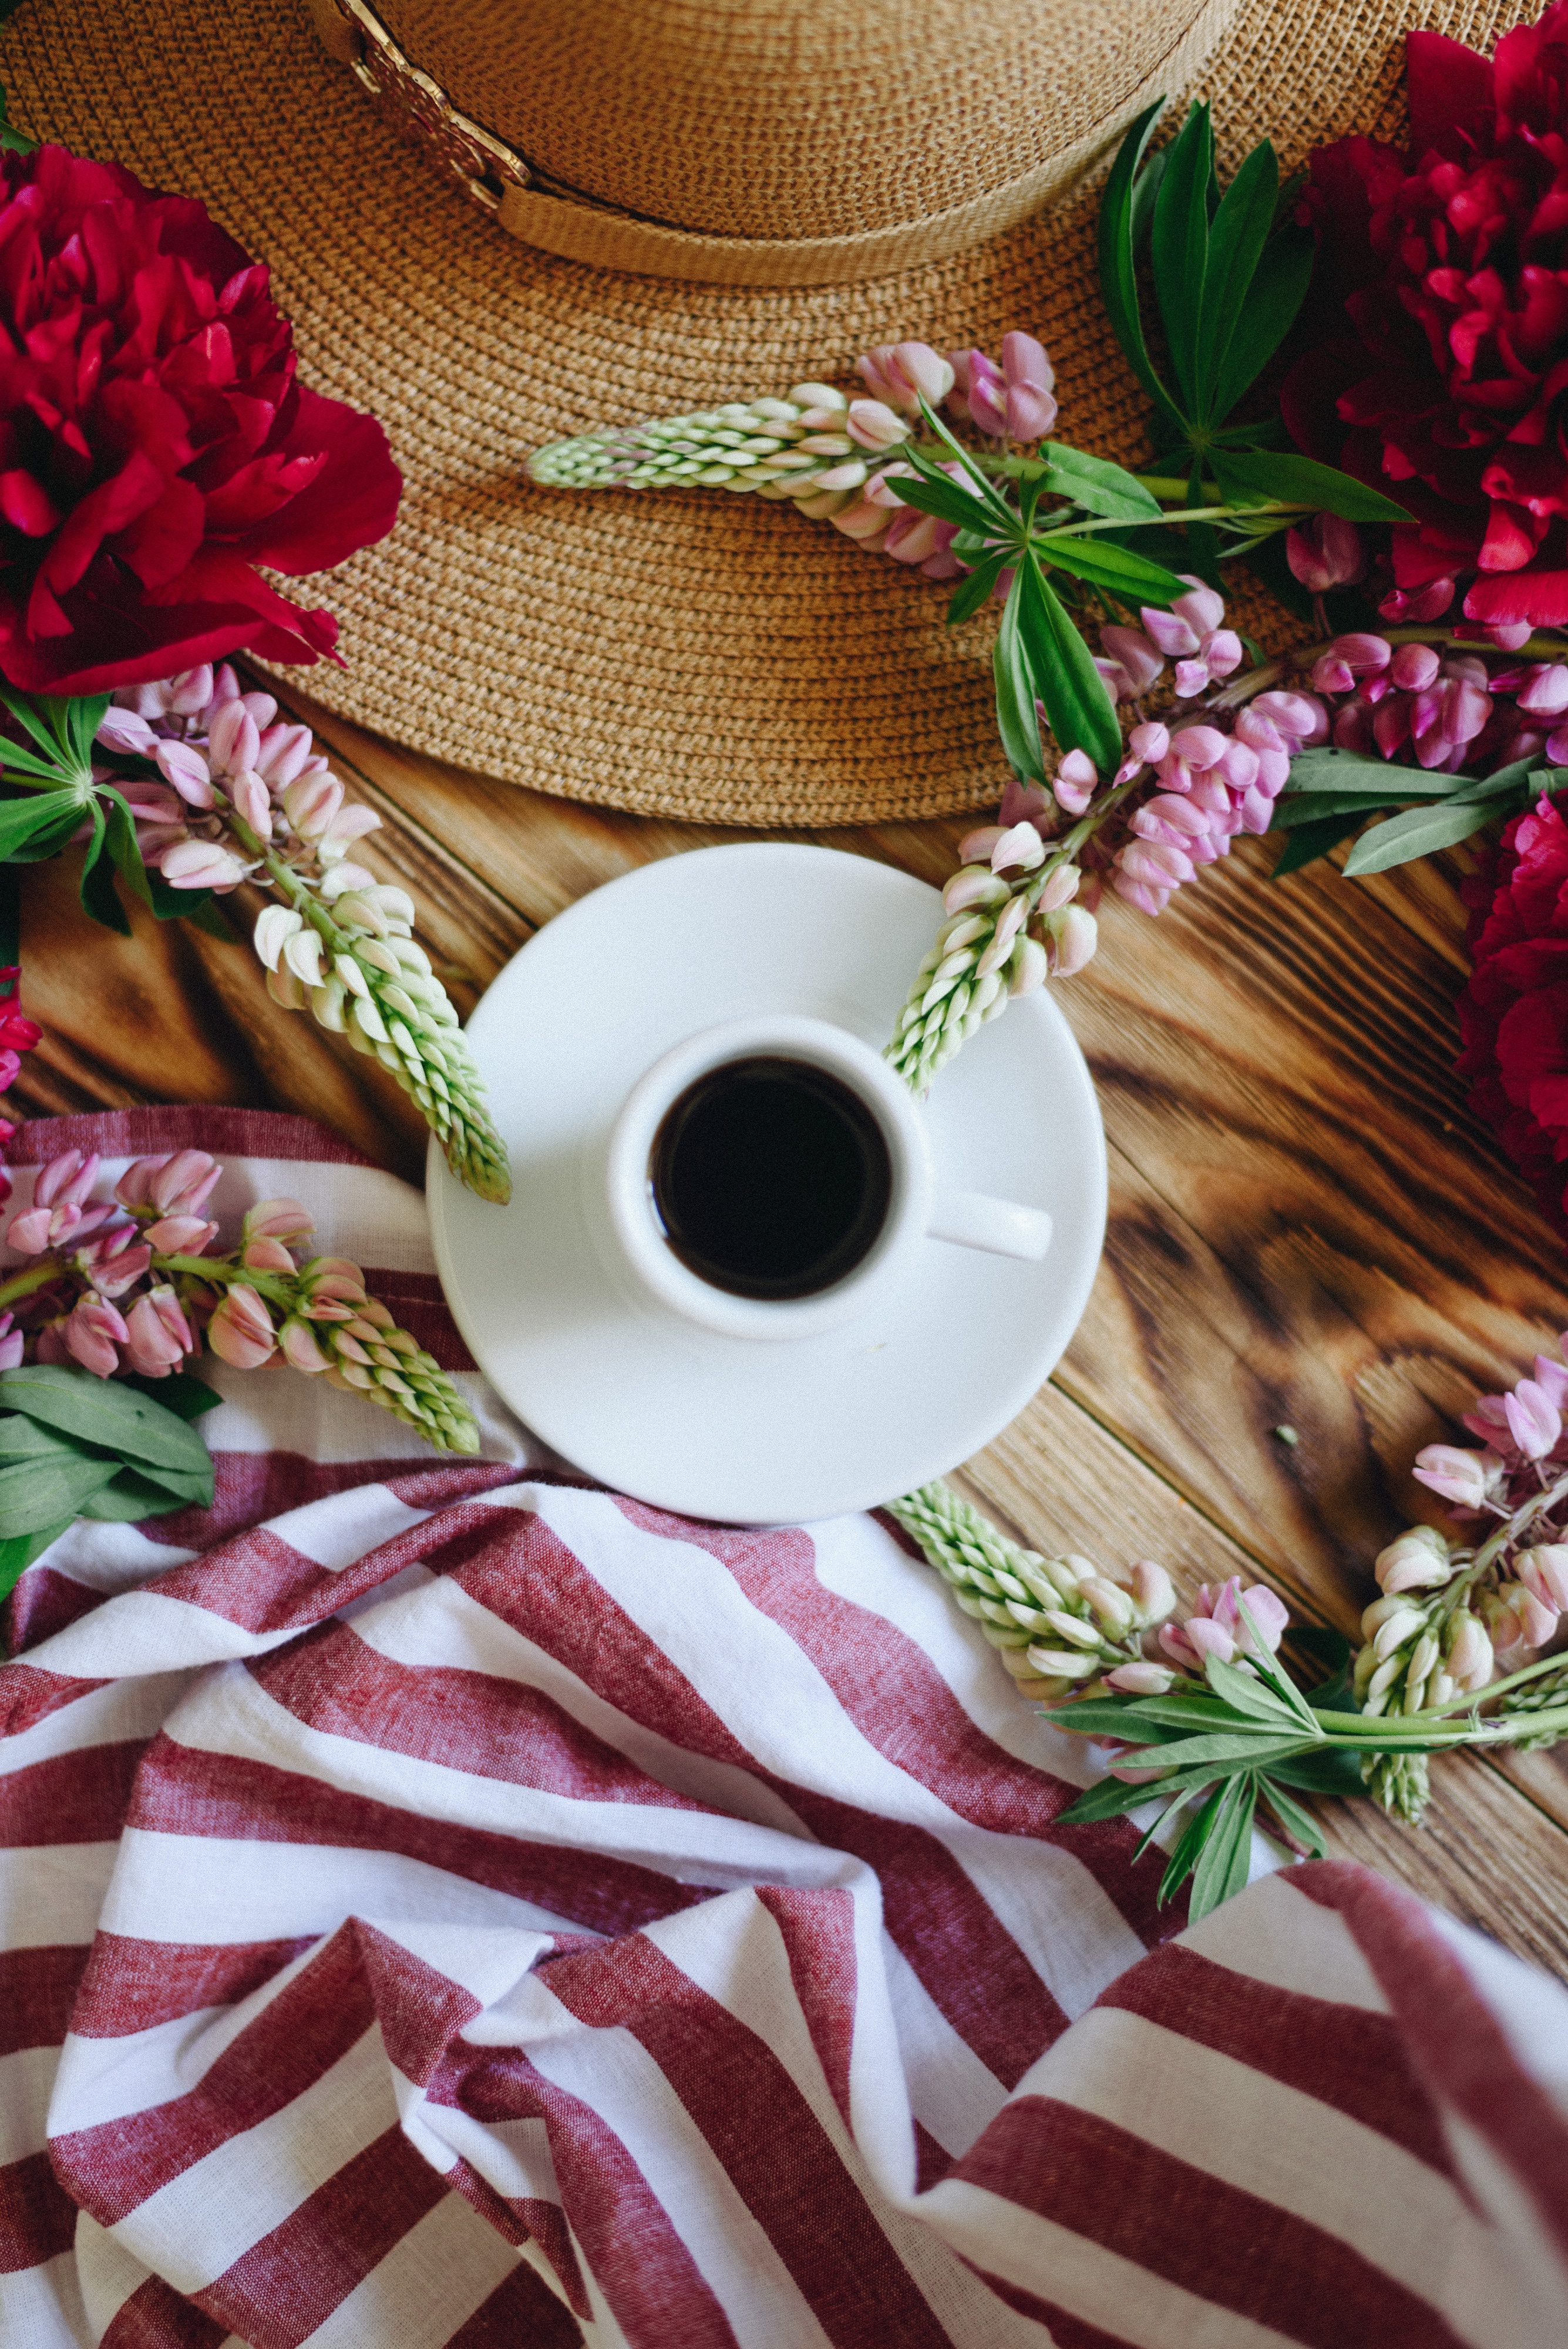 cup, flowers, food, table, hat